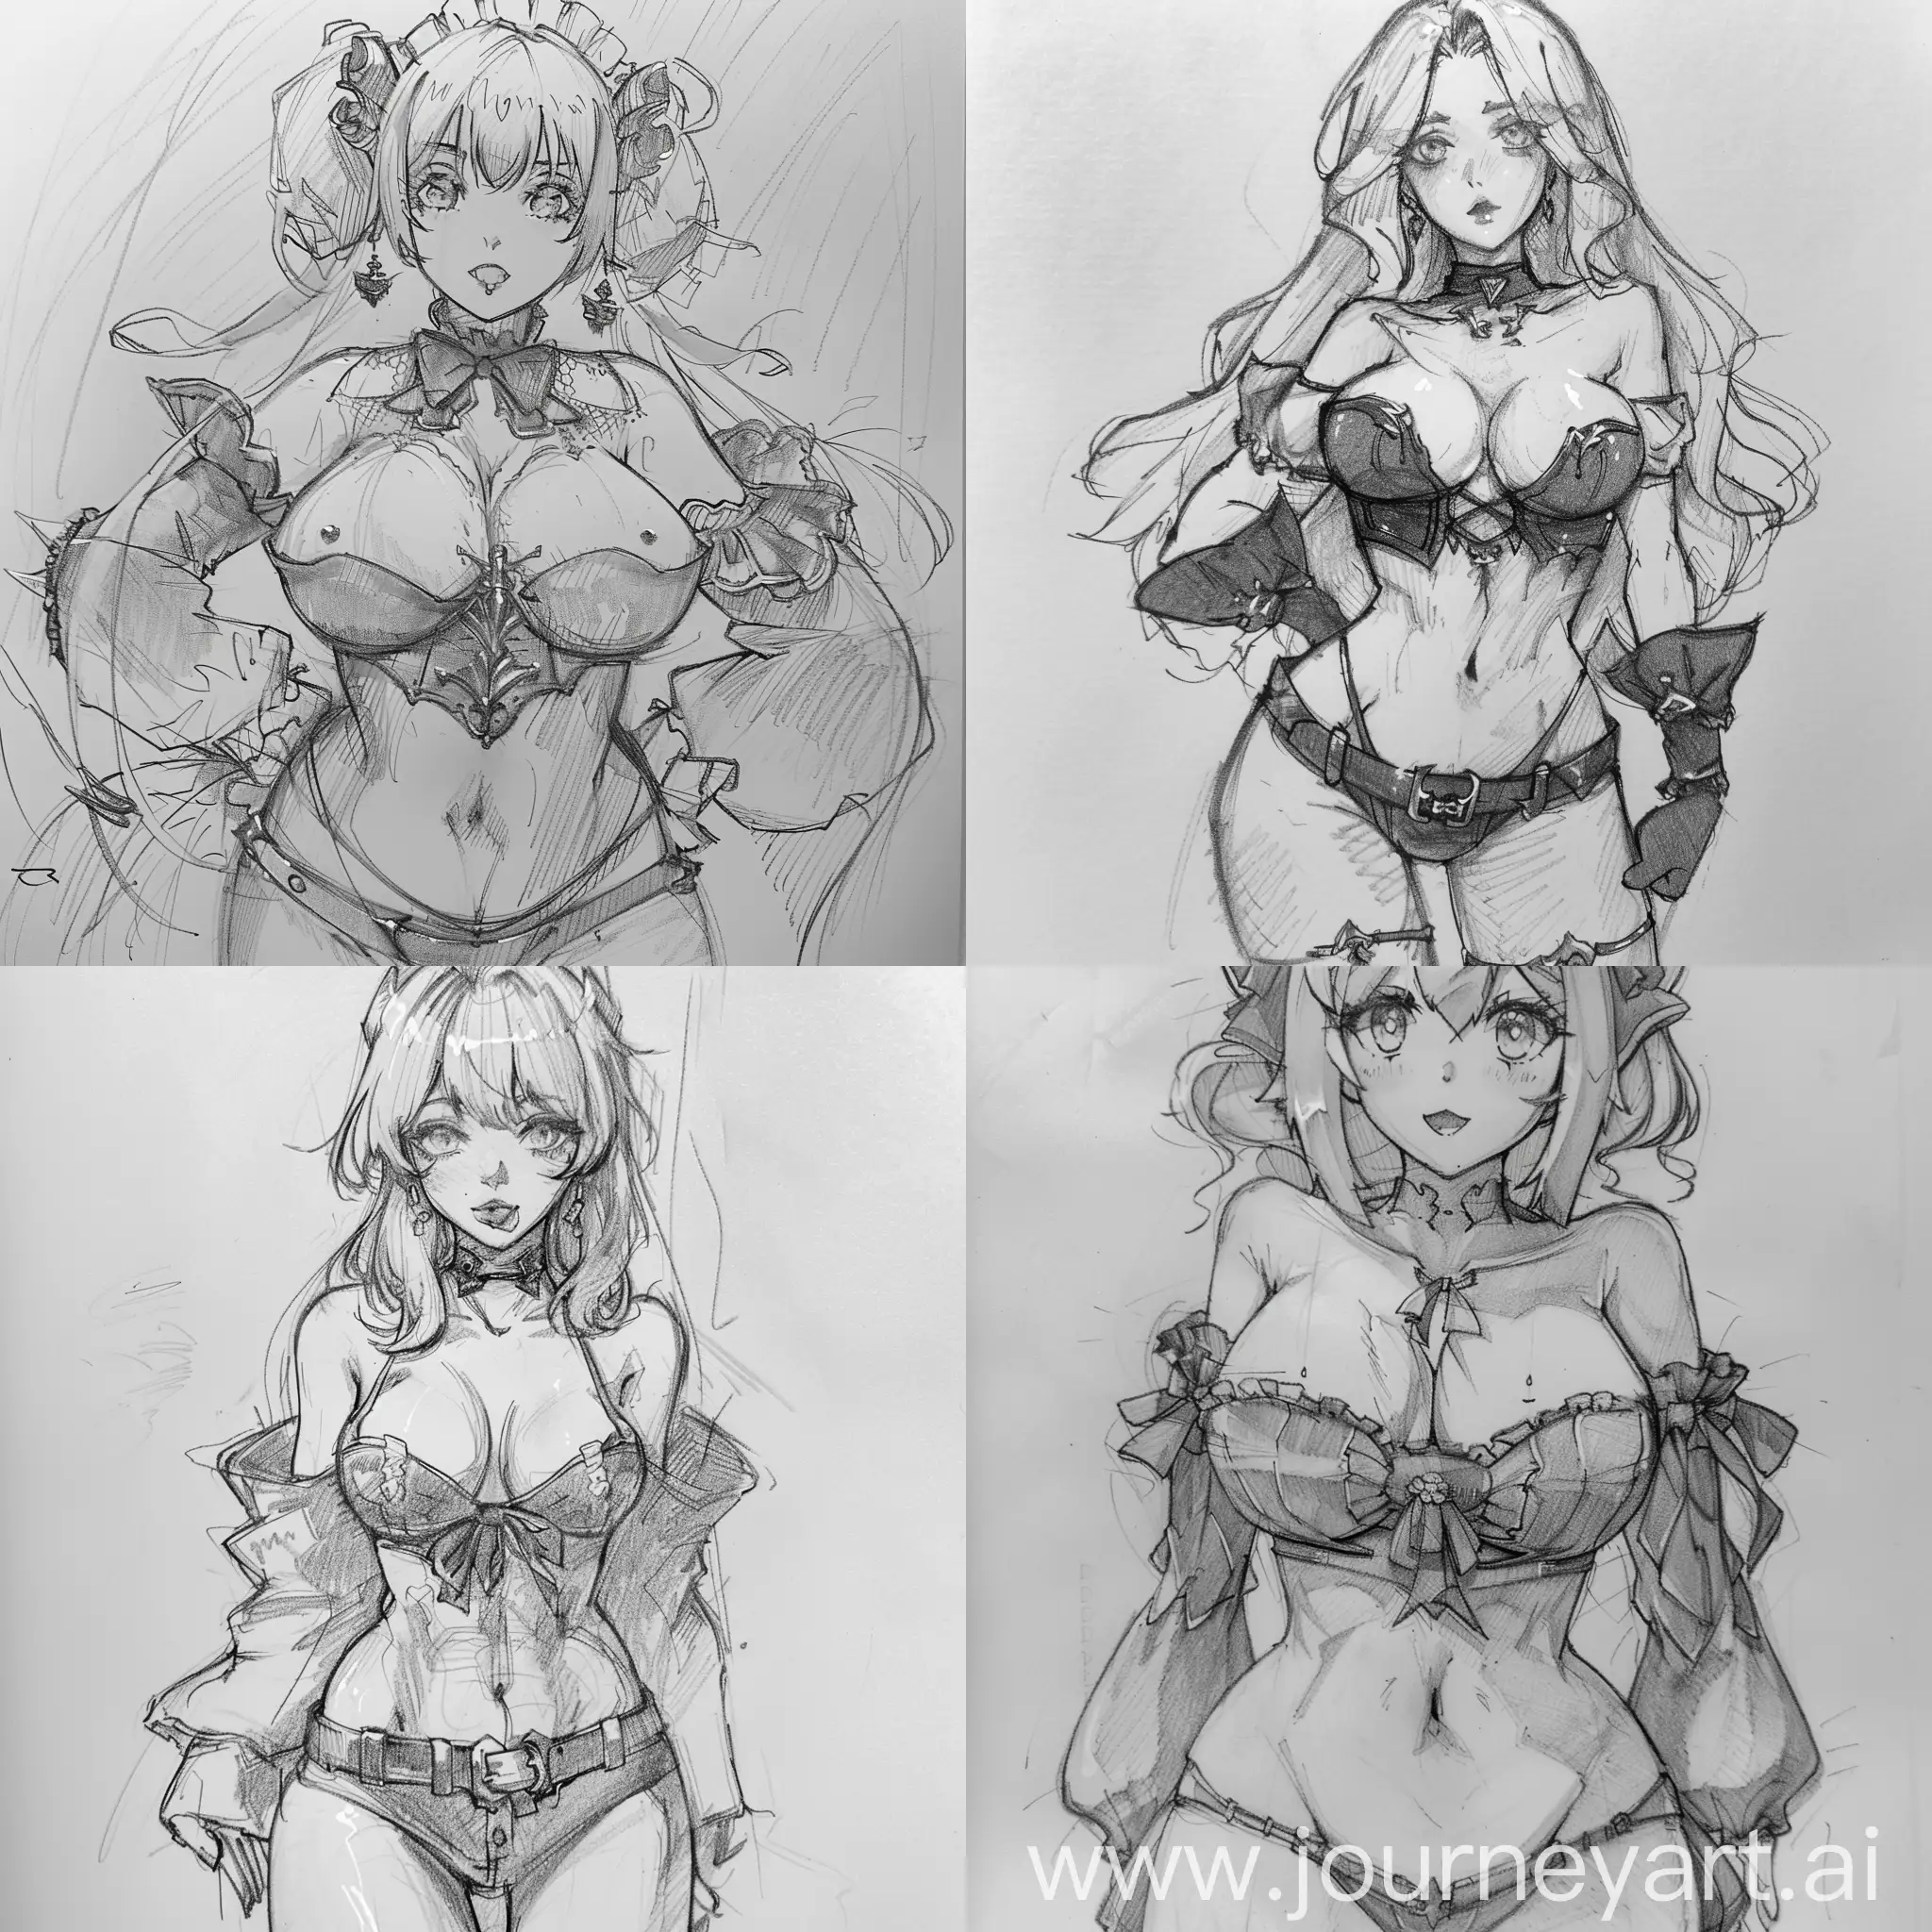 A rough pencil sketch of an anime goth woman with very big and wide hips and a big chest, pencil sketch, anime